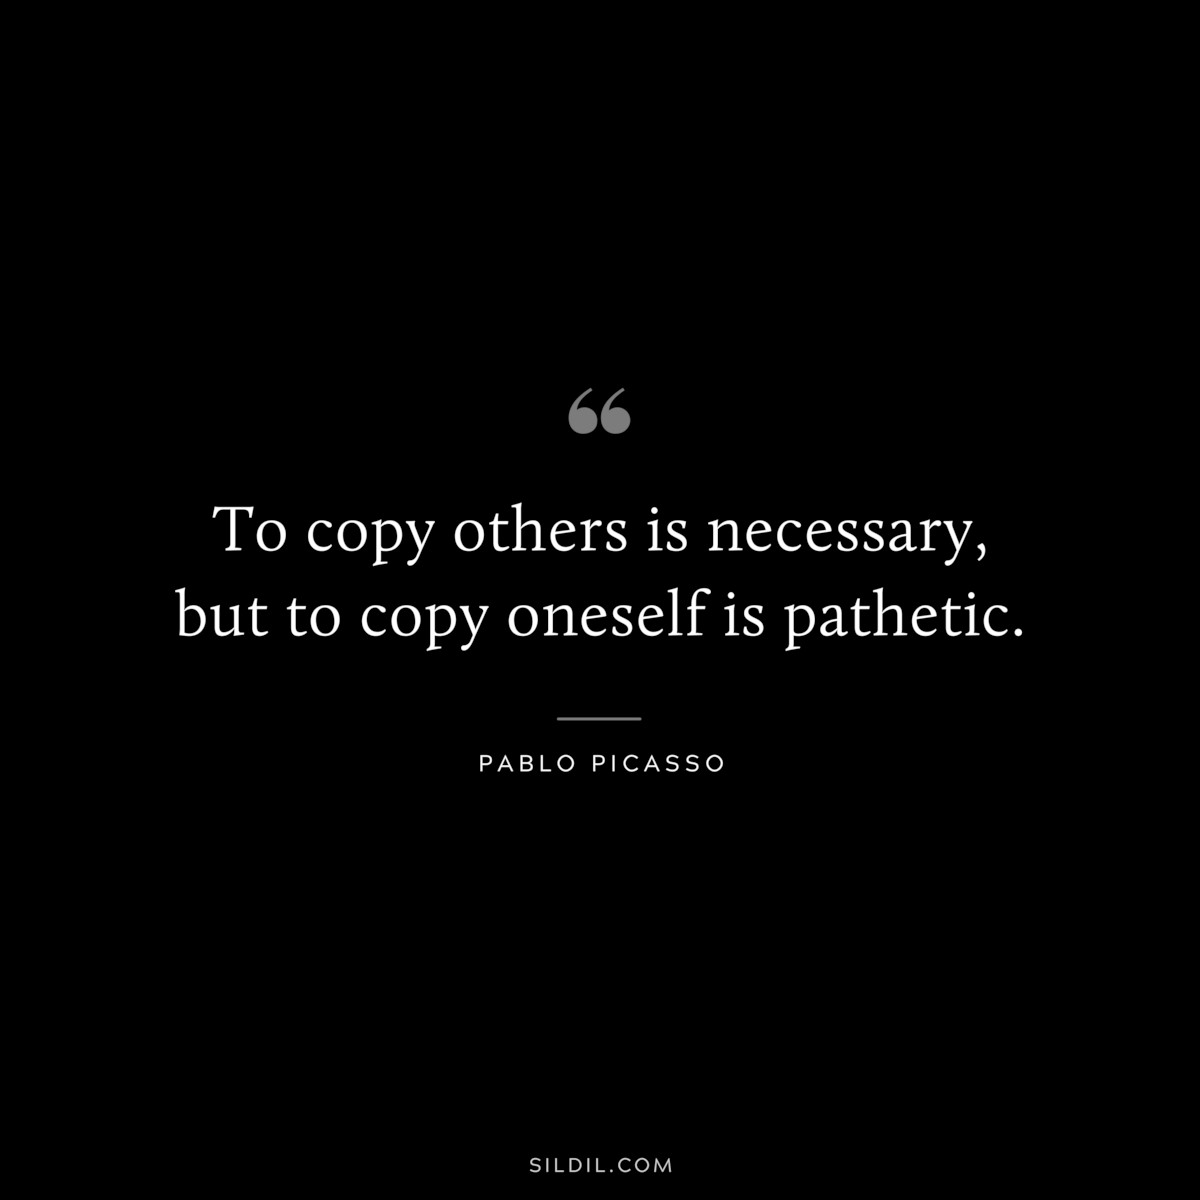 To copy others is necessary, but to copy oneself is pathetic. ― Pablo Picasso